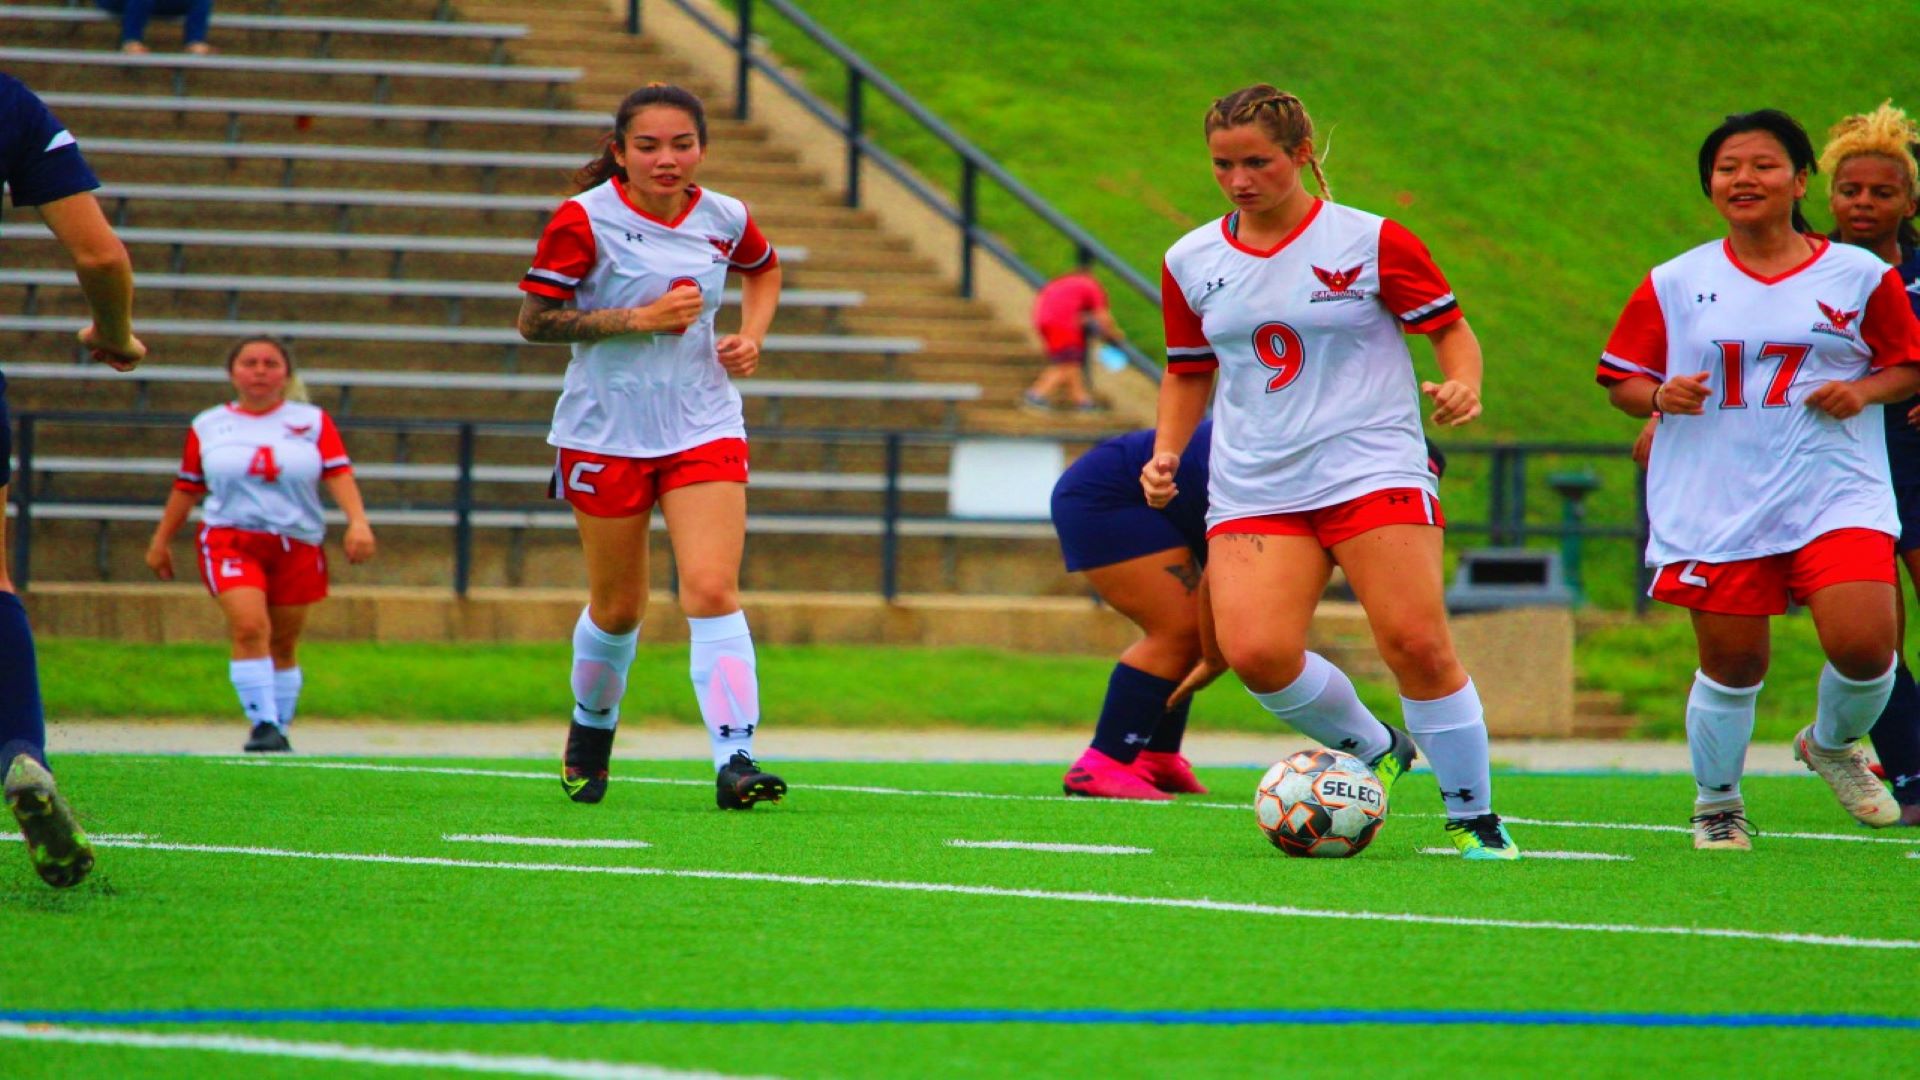 A Valiant Effort, Lady Cardinals Fall to Camden County